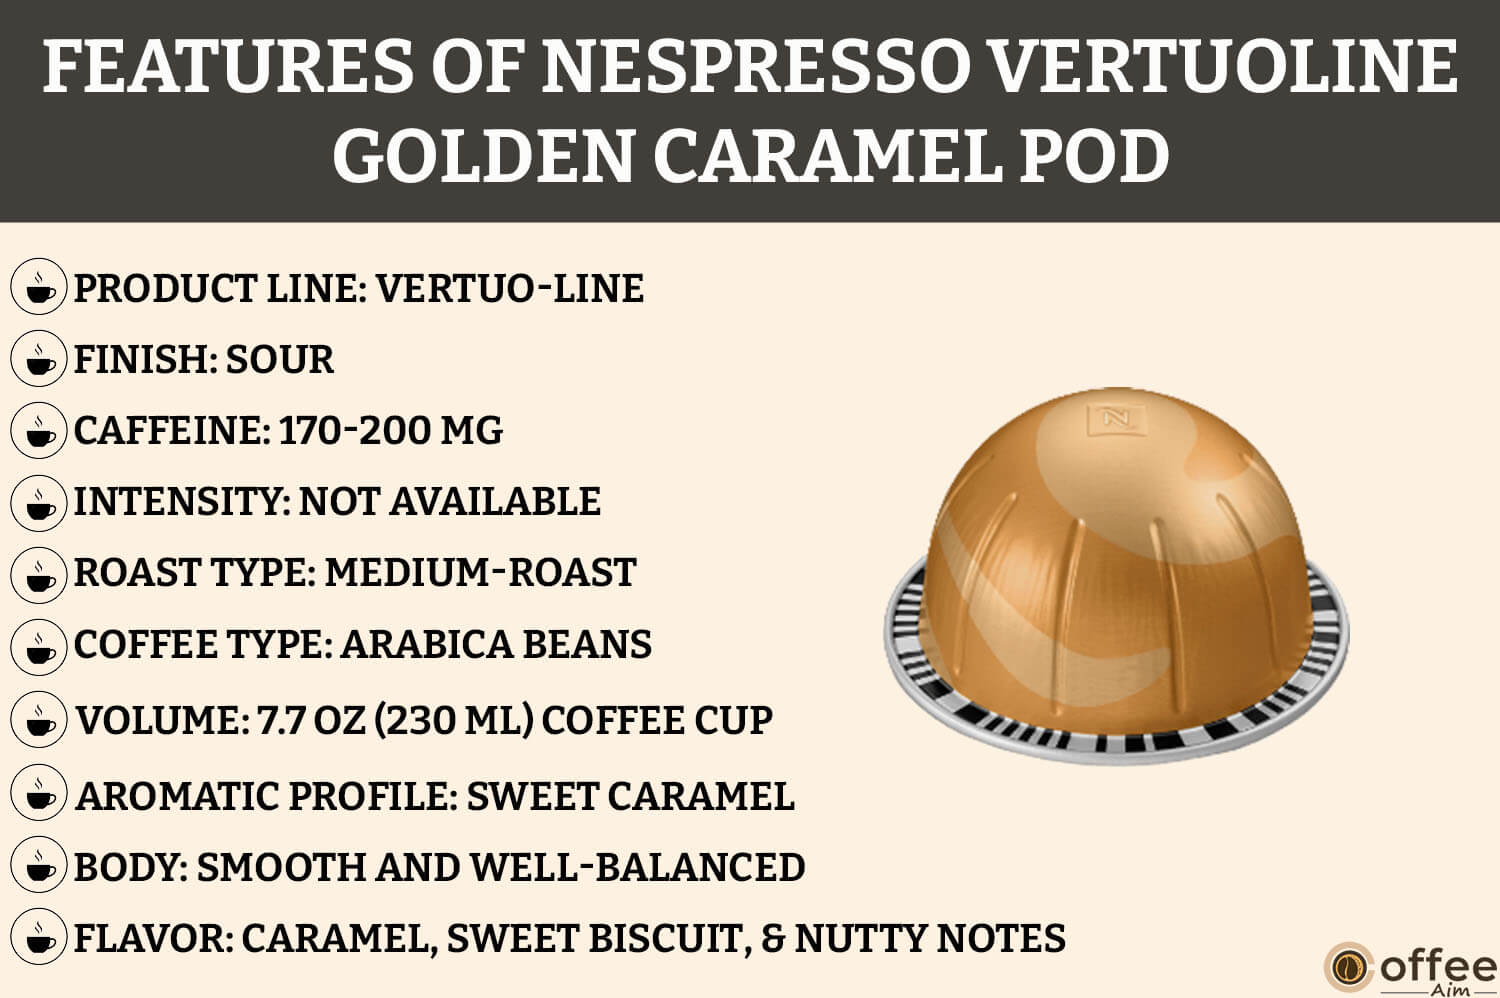 Features of Nespresso Golden Caramel Vertuo Pod highlighted in this image for the article 'Nespresso Golden Caramel Vertuo Pod Review'